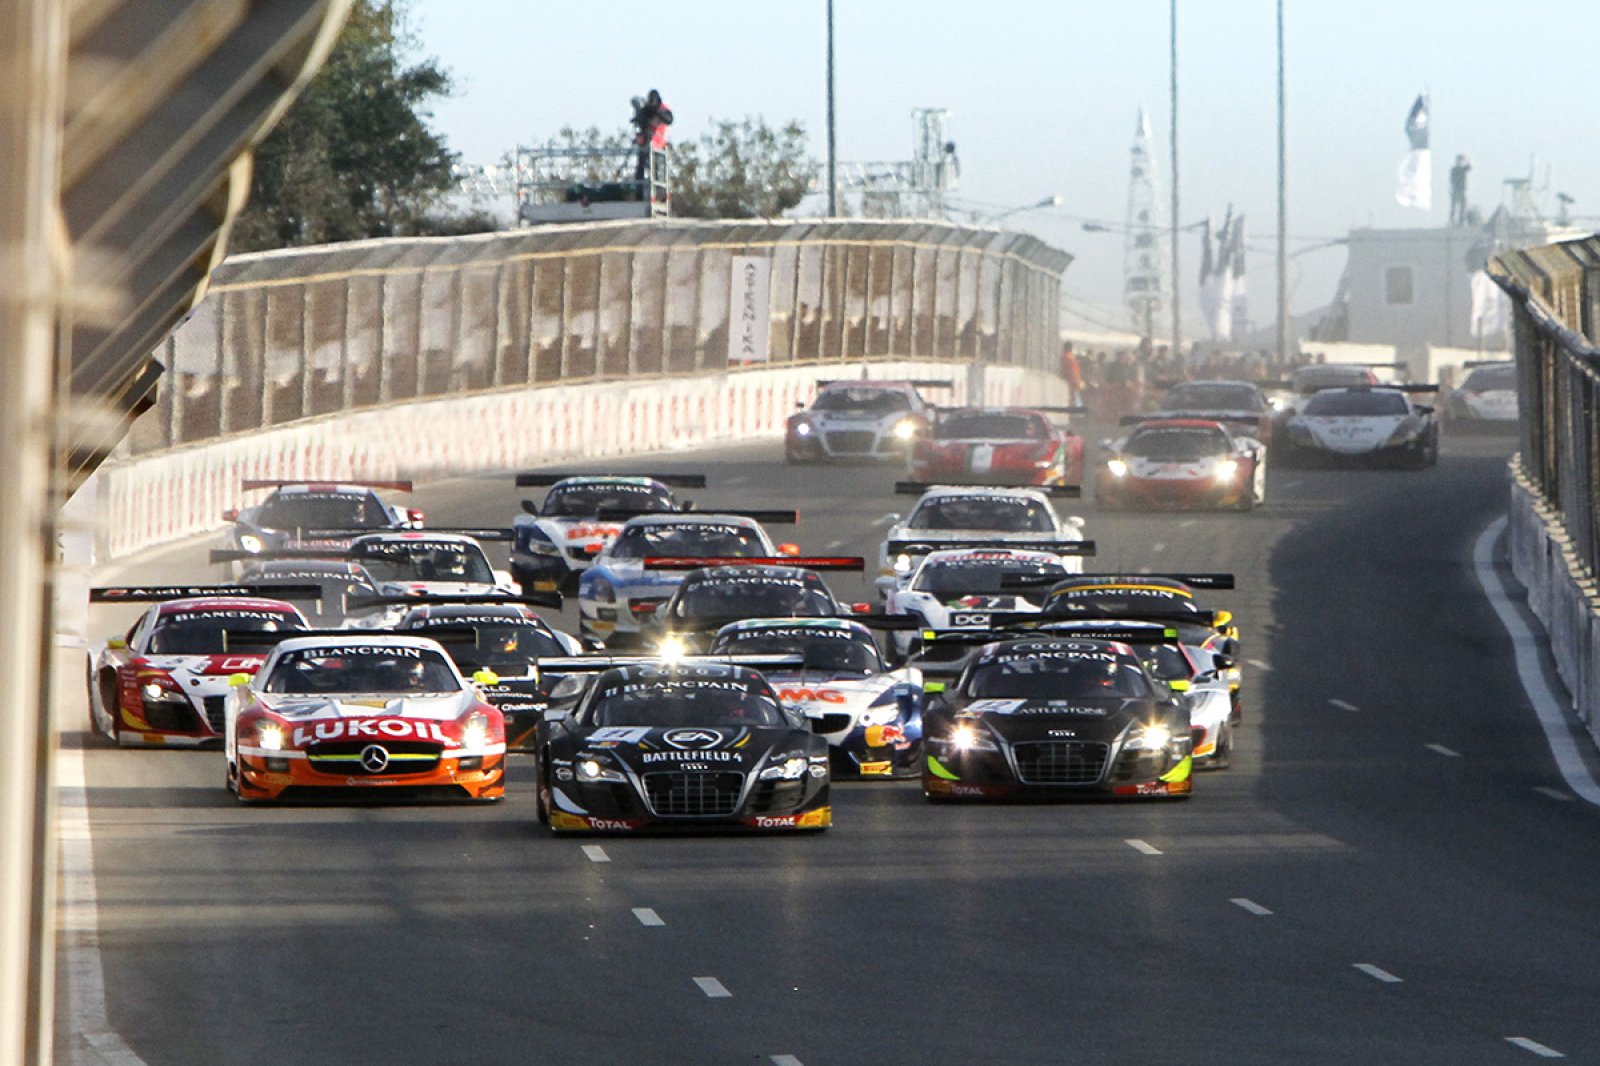 Thrilling finale of the 2014 Blancpain Sprint Series at the Baku World Challenge